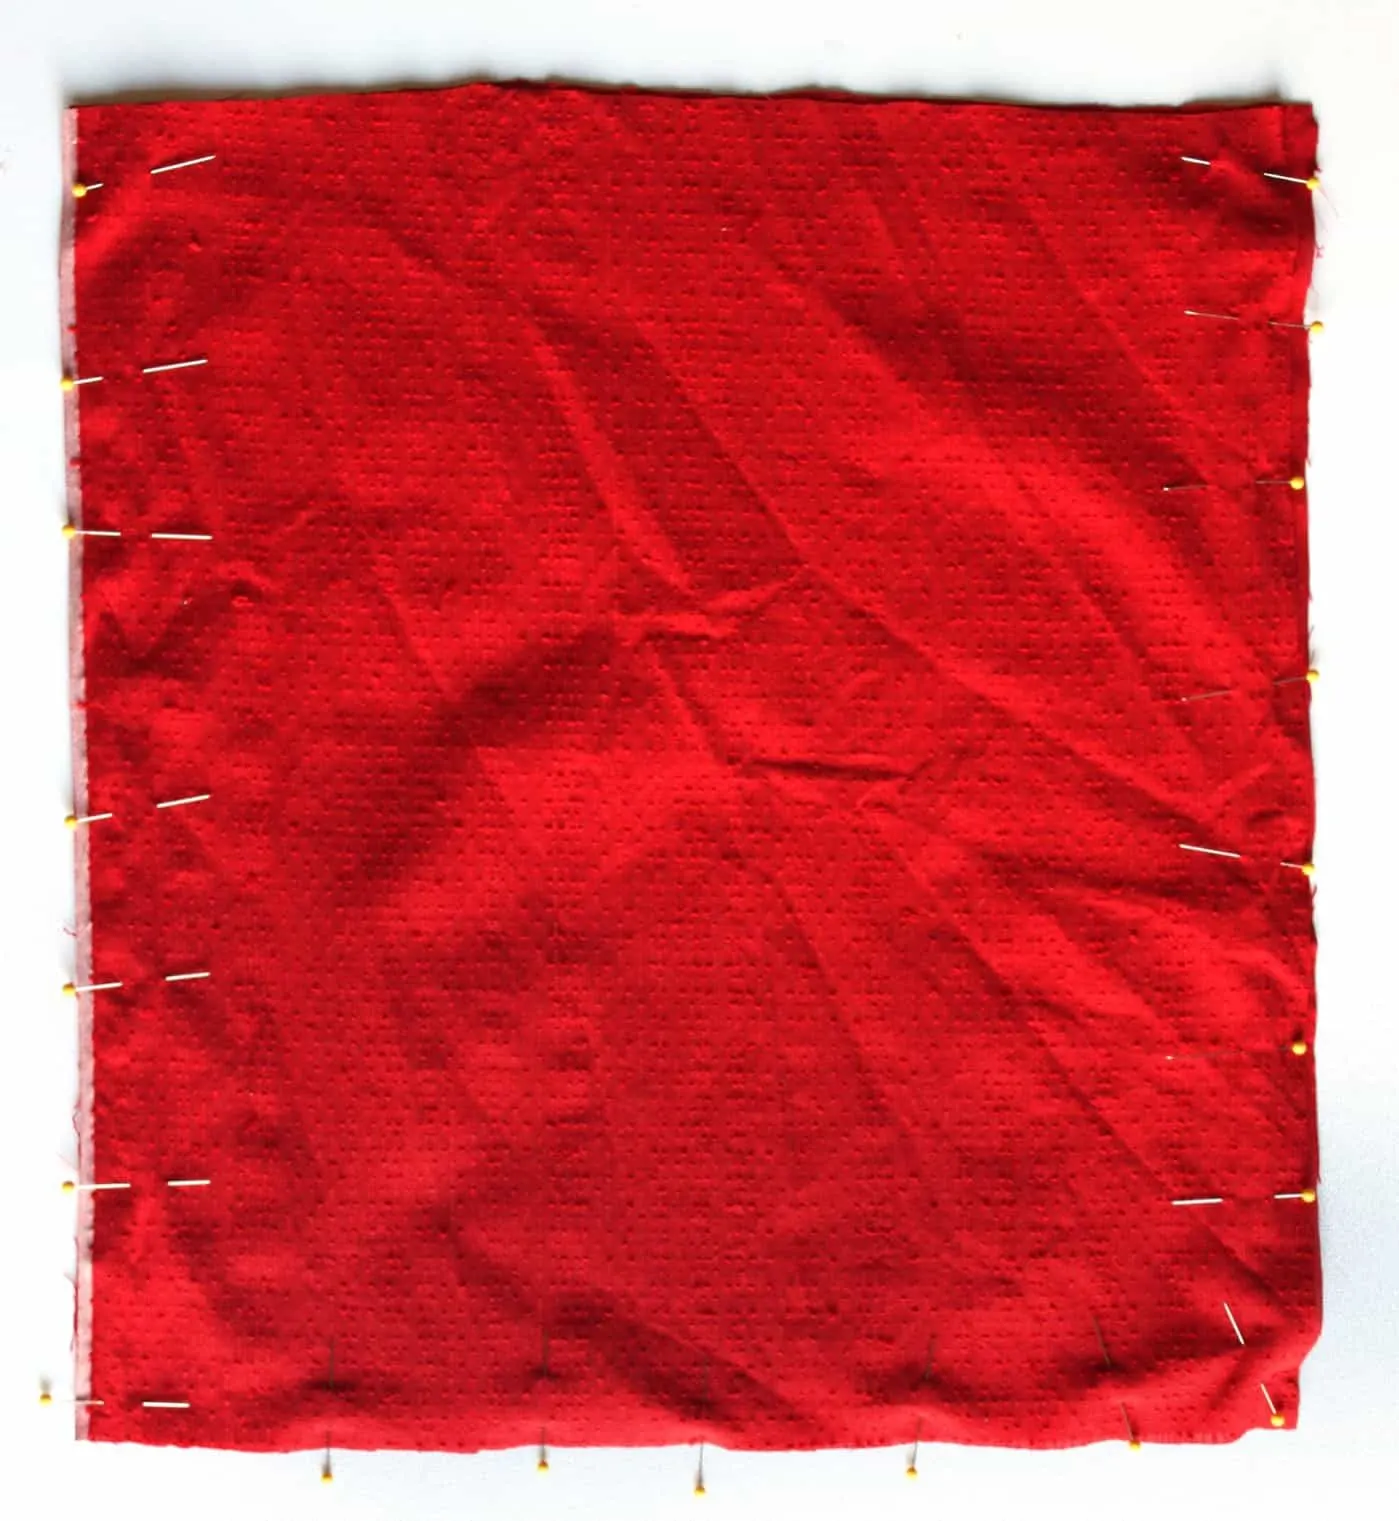 Red fabric lining pinned together on a work surface